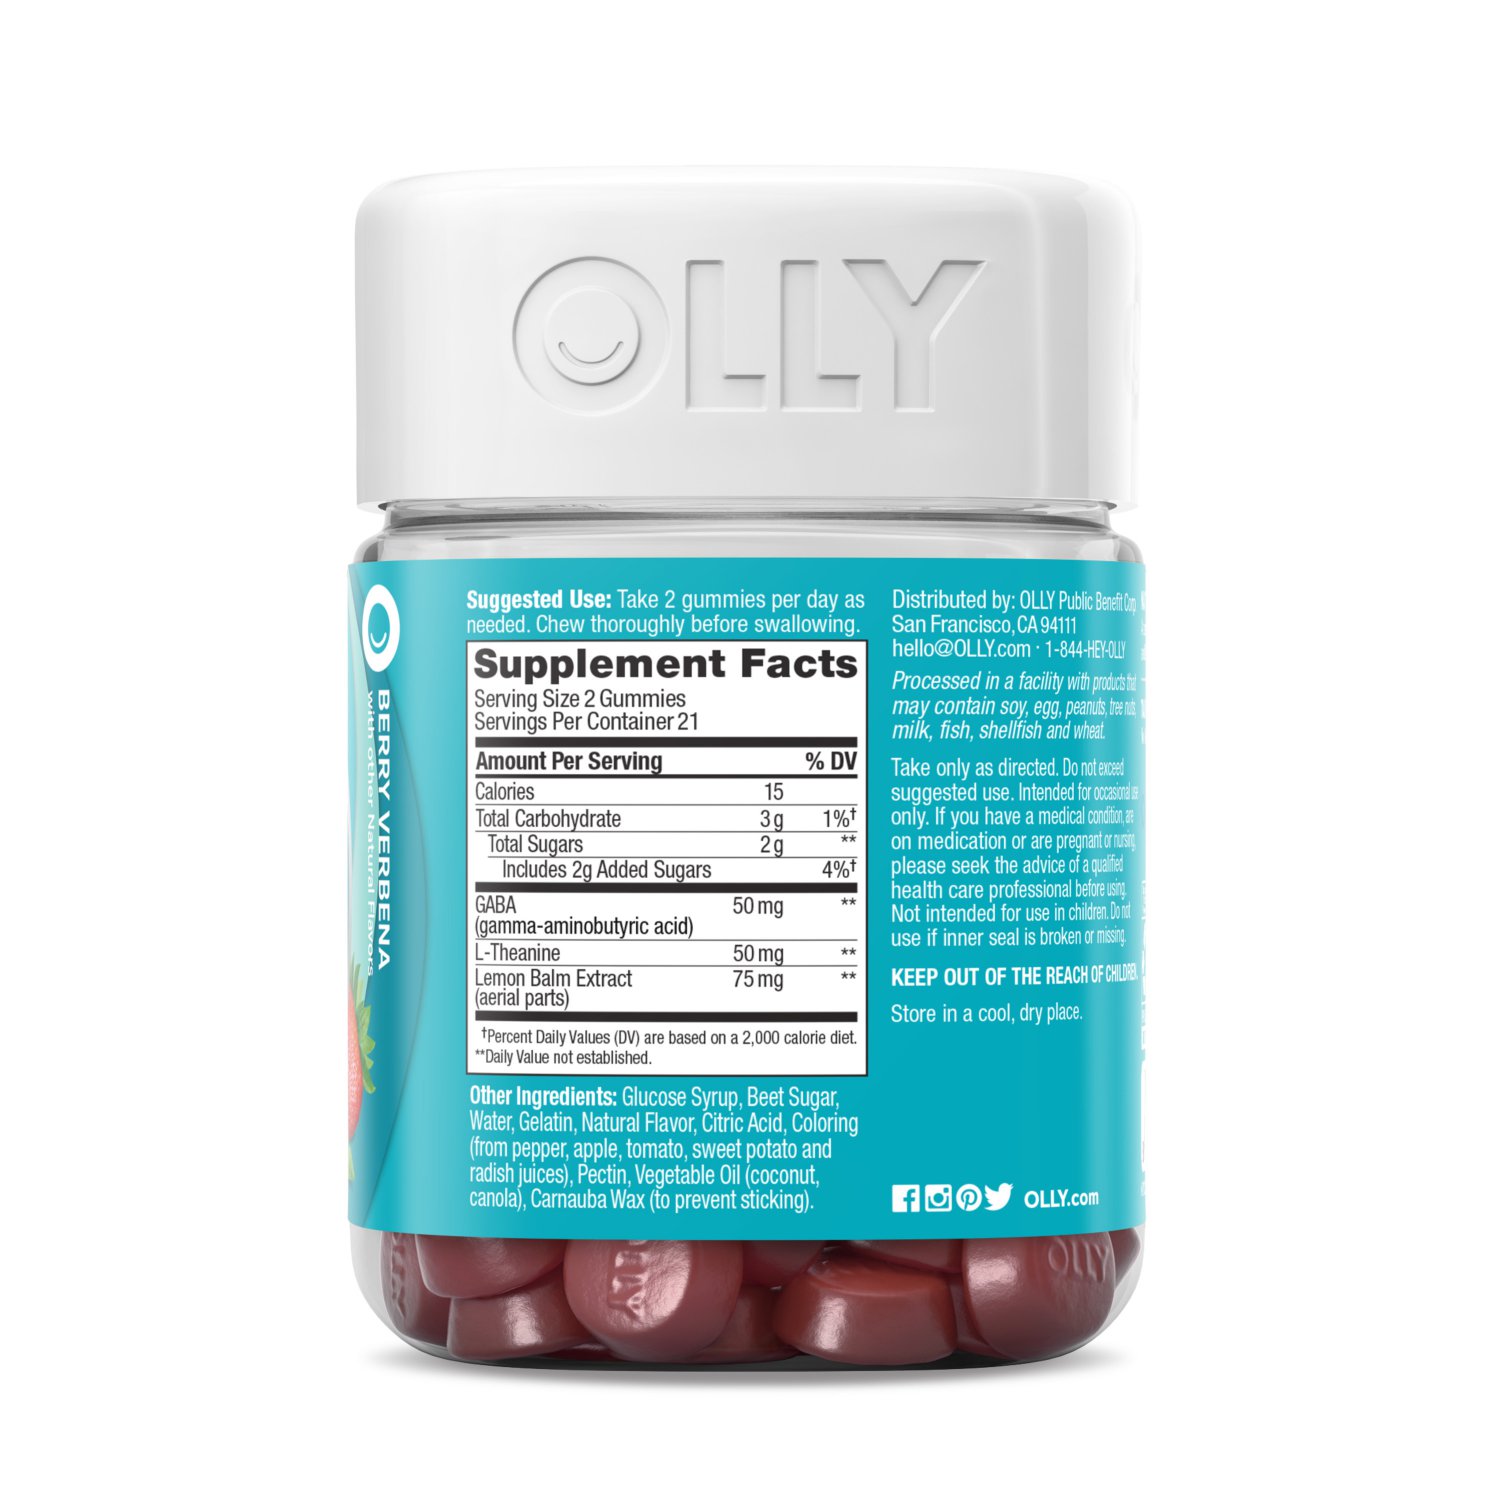 olly stress gummies for kids